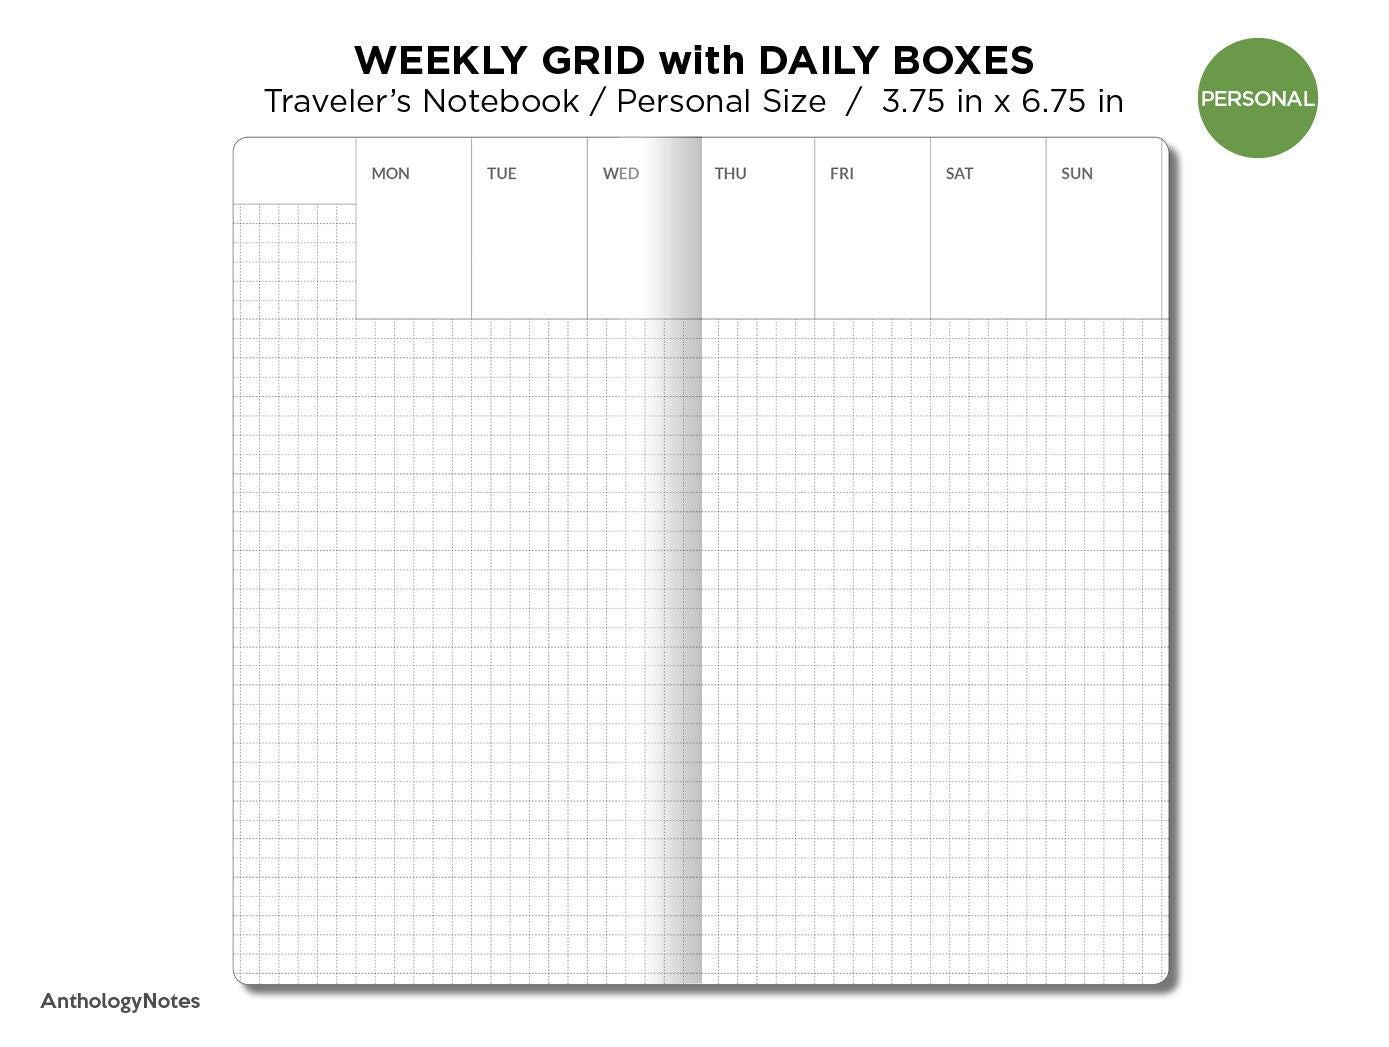 TN Personal Size Weekly GRID with DAILY Boxes Printable Traveler's Notebook Insert